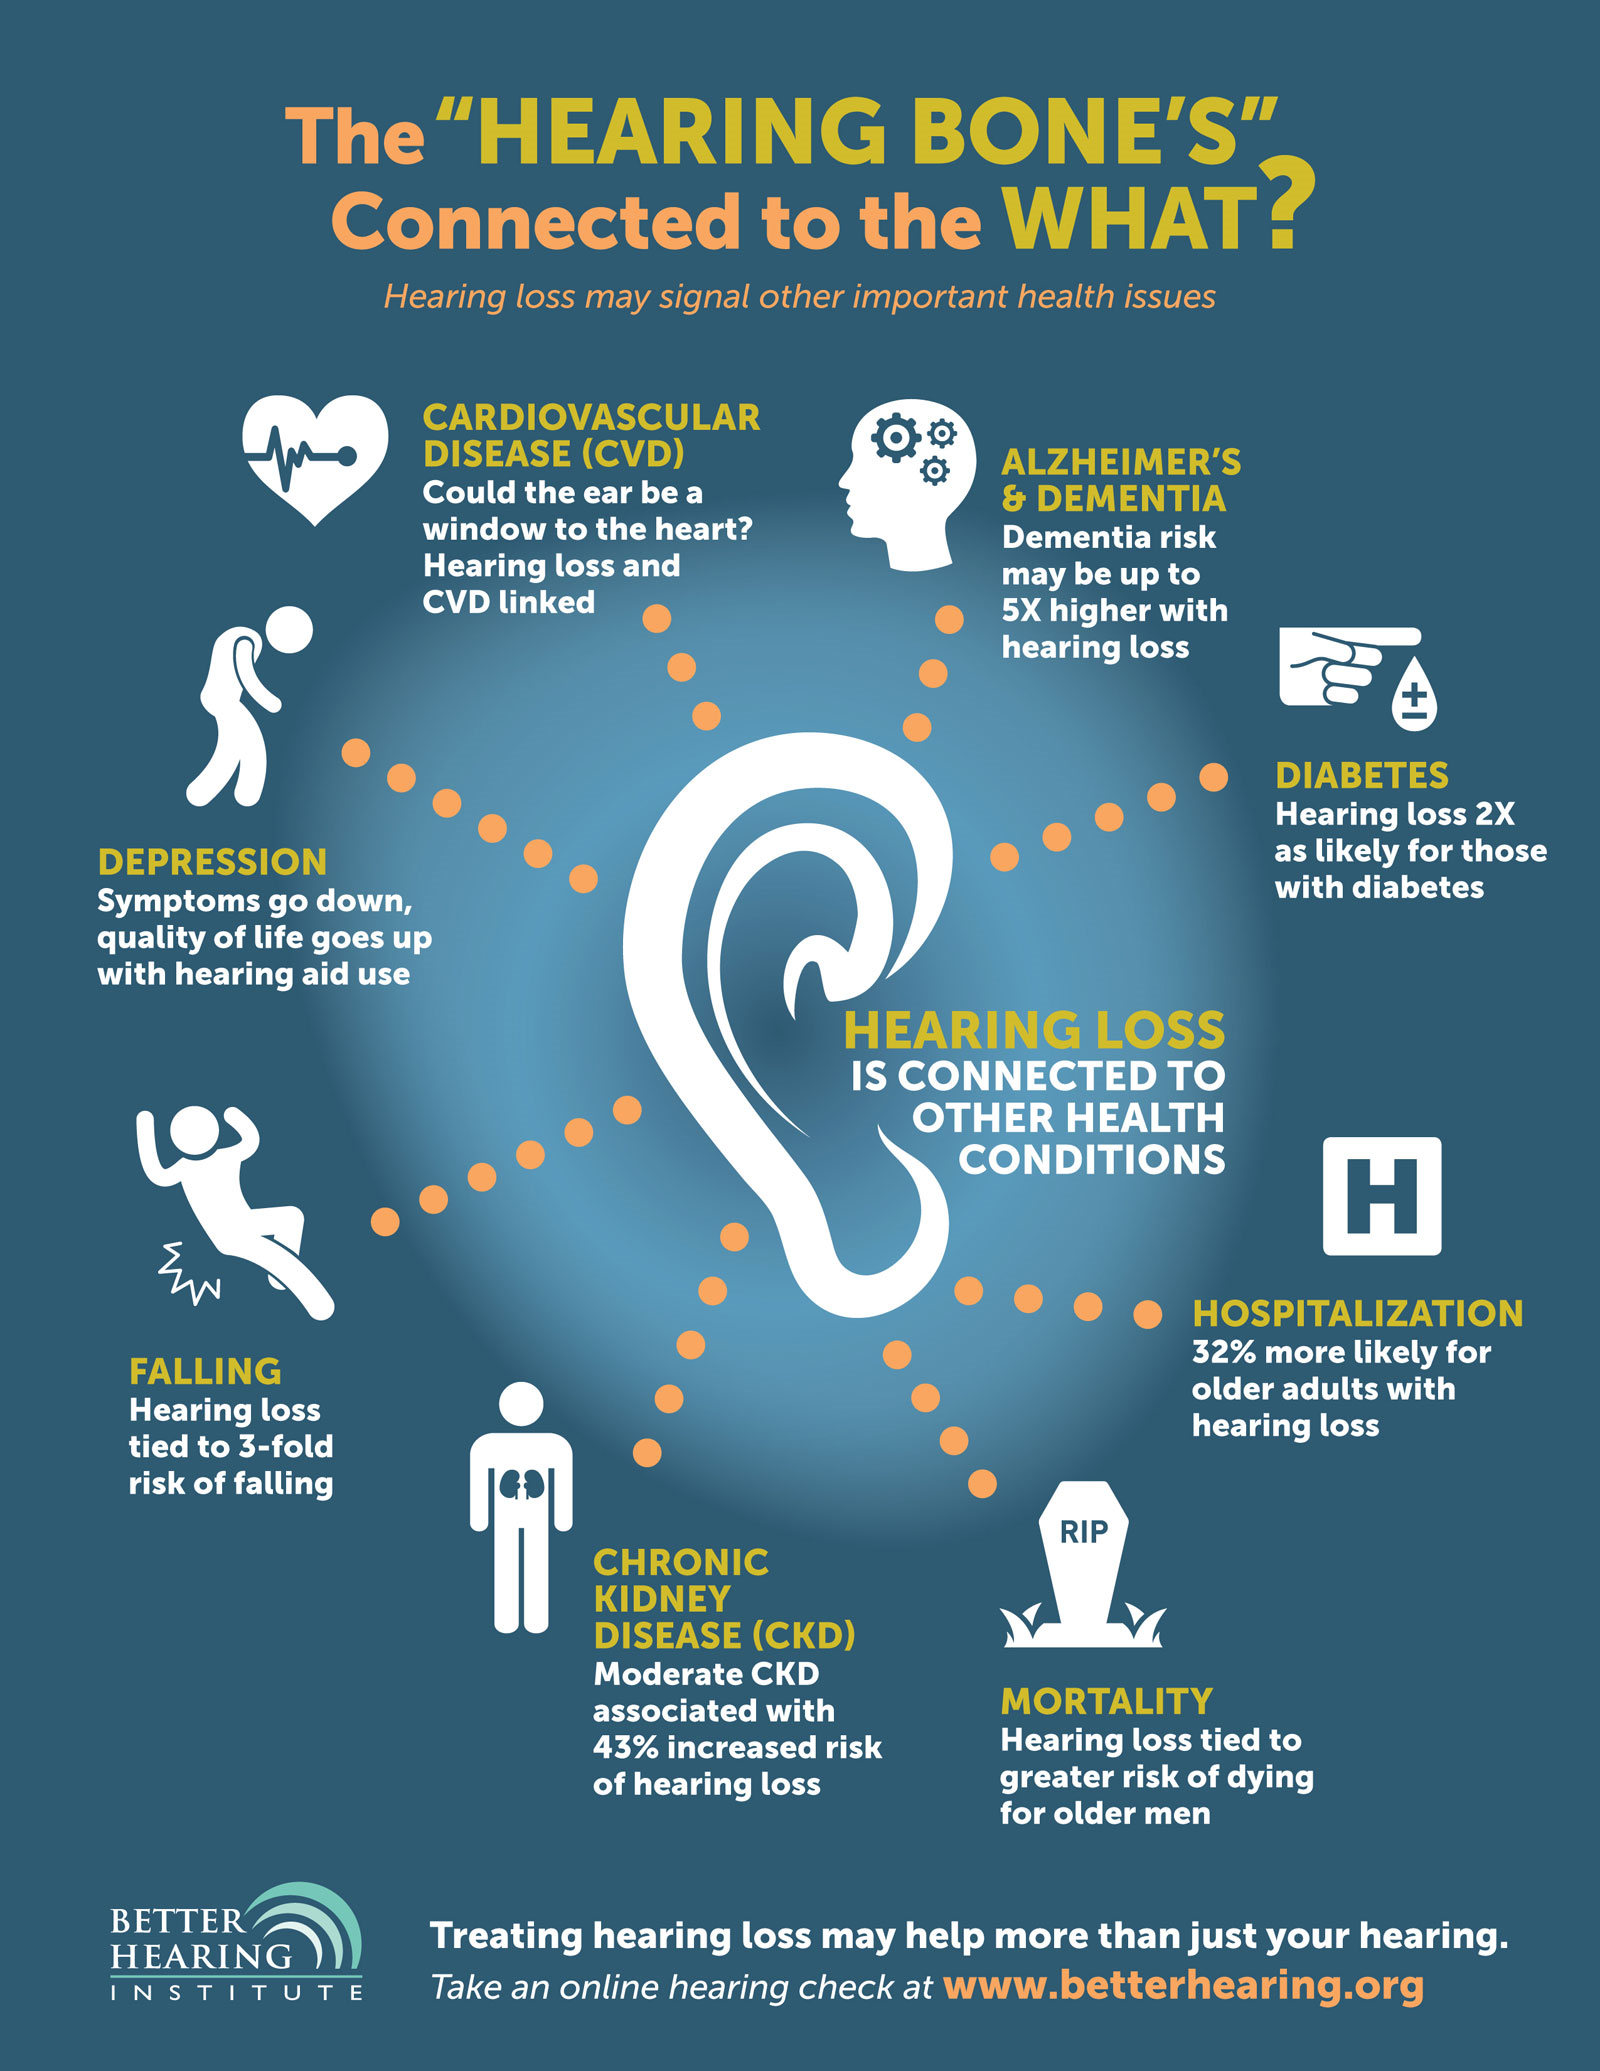 Beyond Sound Hearing Loss Linked To Other Health Issues Infographic